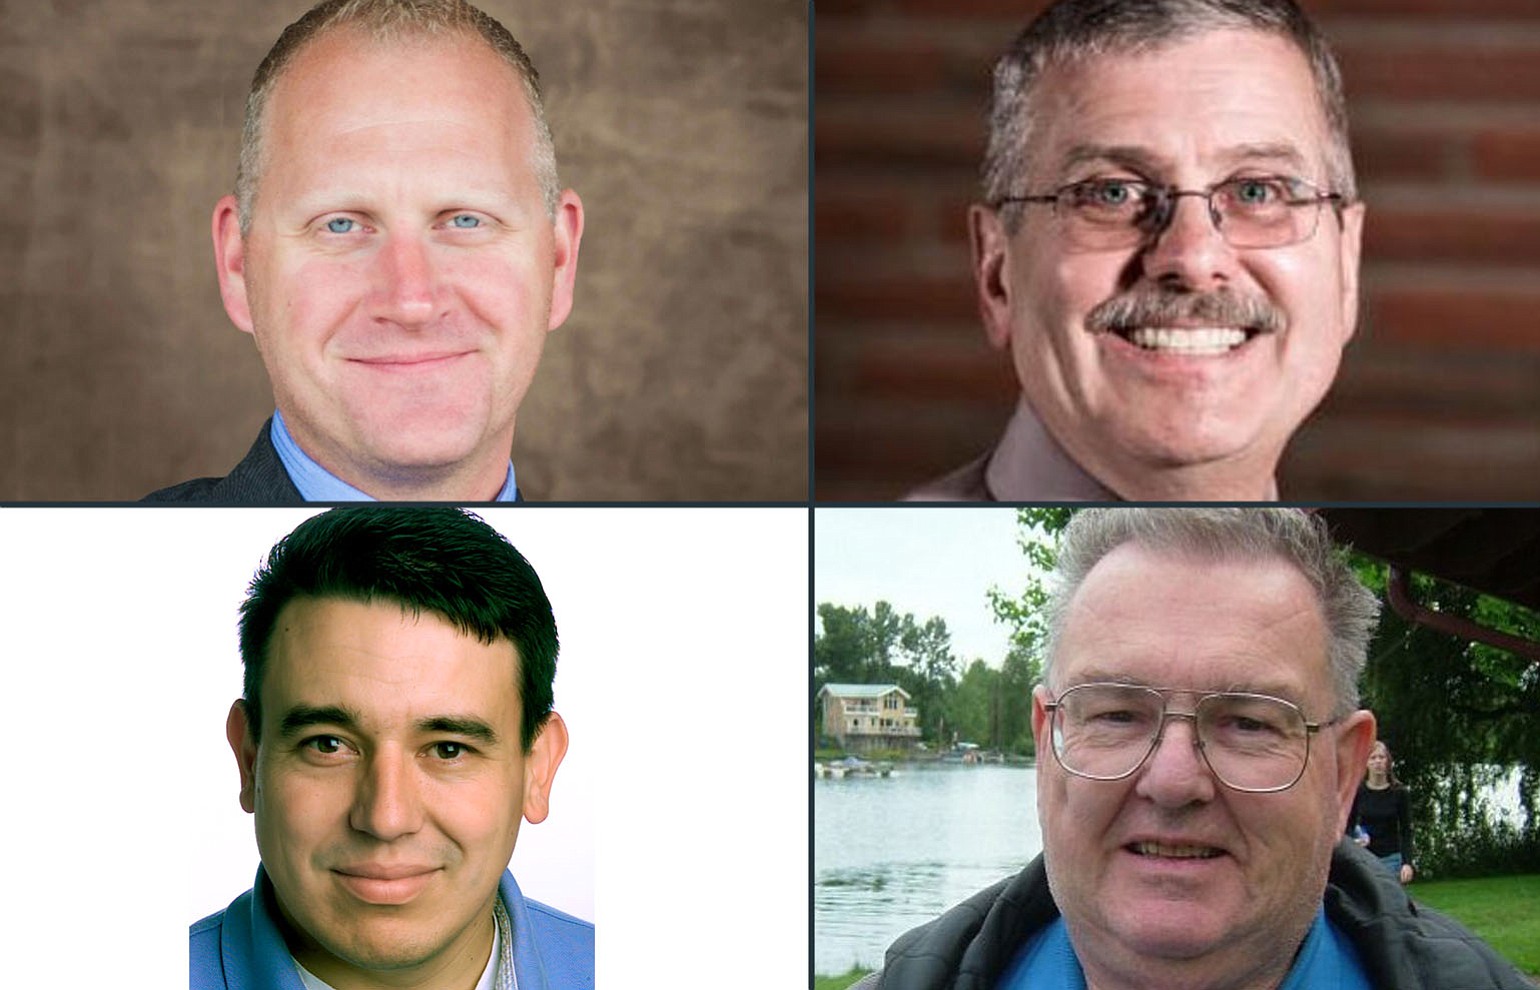 Clockwise from top left: WSP Trooper Will Finn, running to be the next mayor of Woodland; Grover Laseke, 
current Woodland mayor; Jim Graham, former Woodland Mayor; Doug Monge, former Woodland mayor